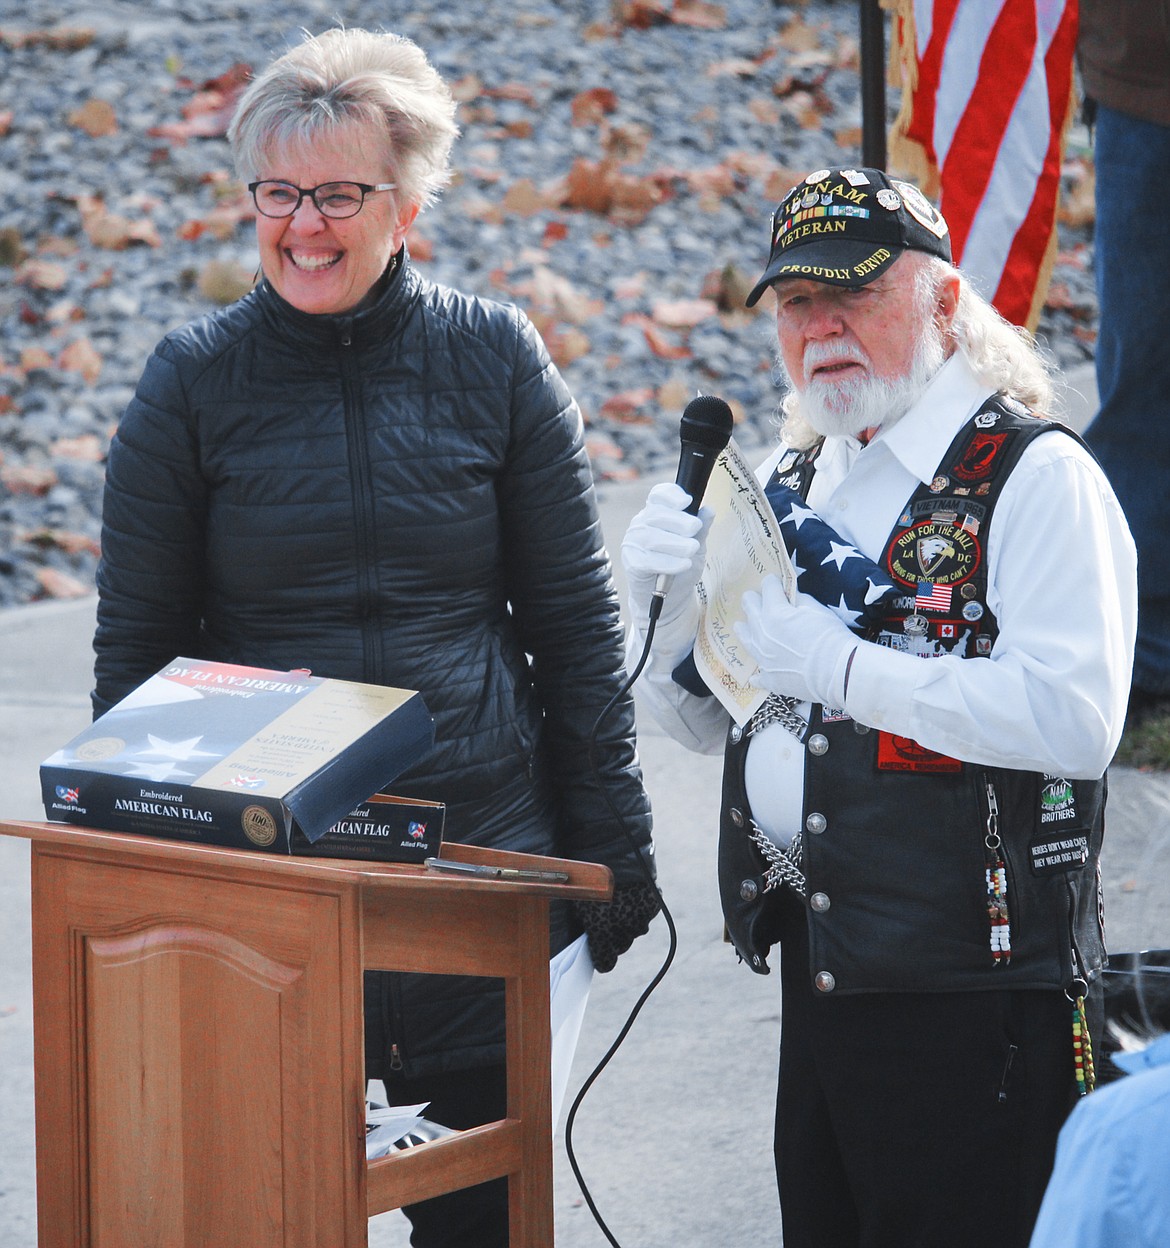 Photos by TONIA BROOKS
Karen Roetter, regional director for Senator Mike Crapo&#146;s (R-Idaho) office, presents the Spirit of Freedom Award to Vietnam War veteran, Ron McIlnay, during Monday&#146;s Veterans Day ceremony in Bonners Ferry.